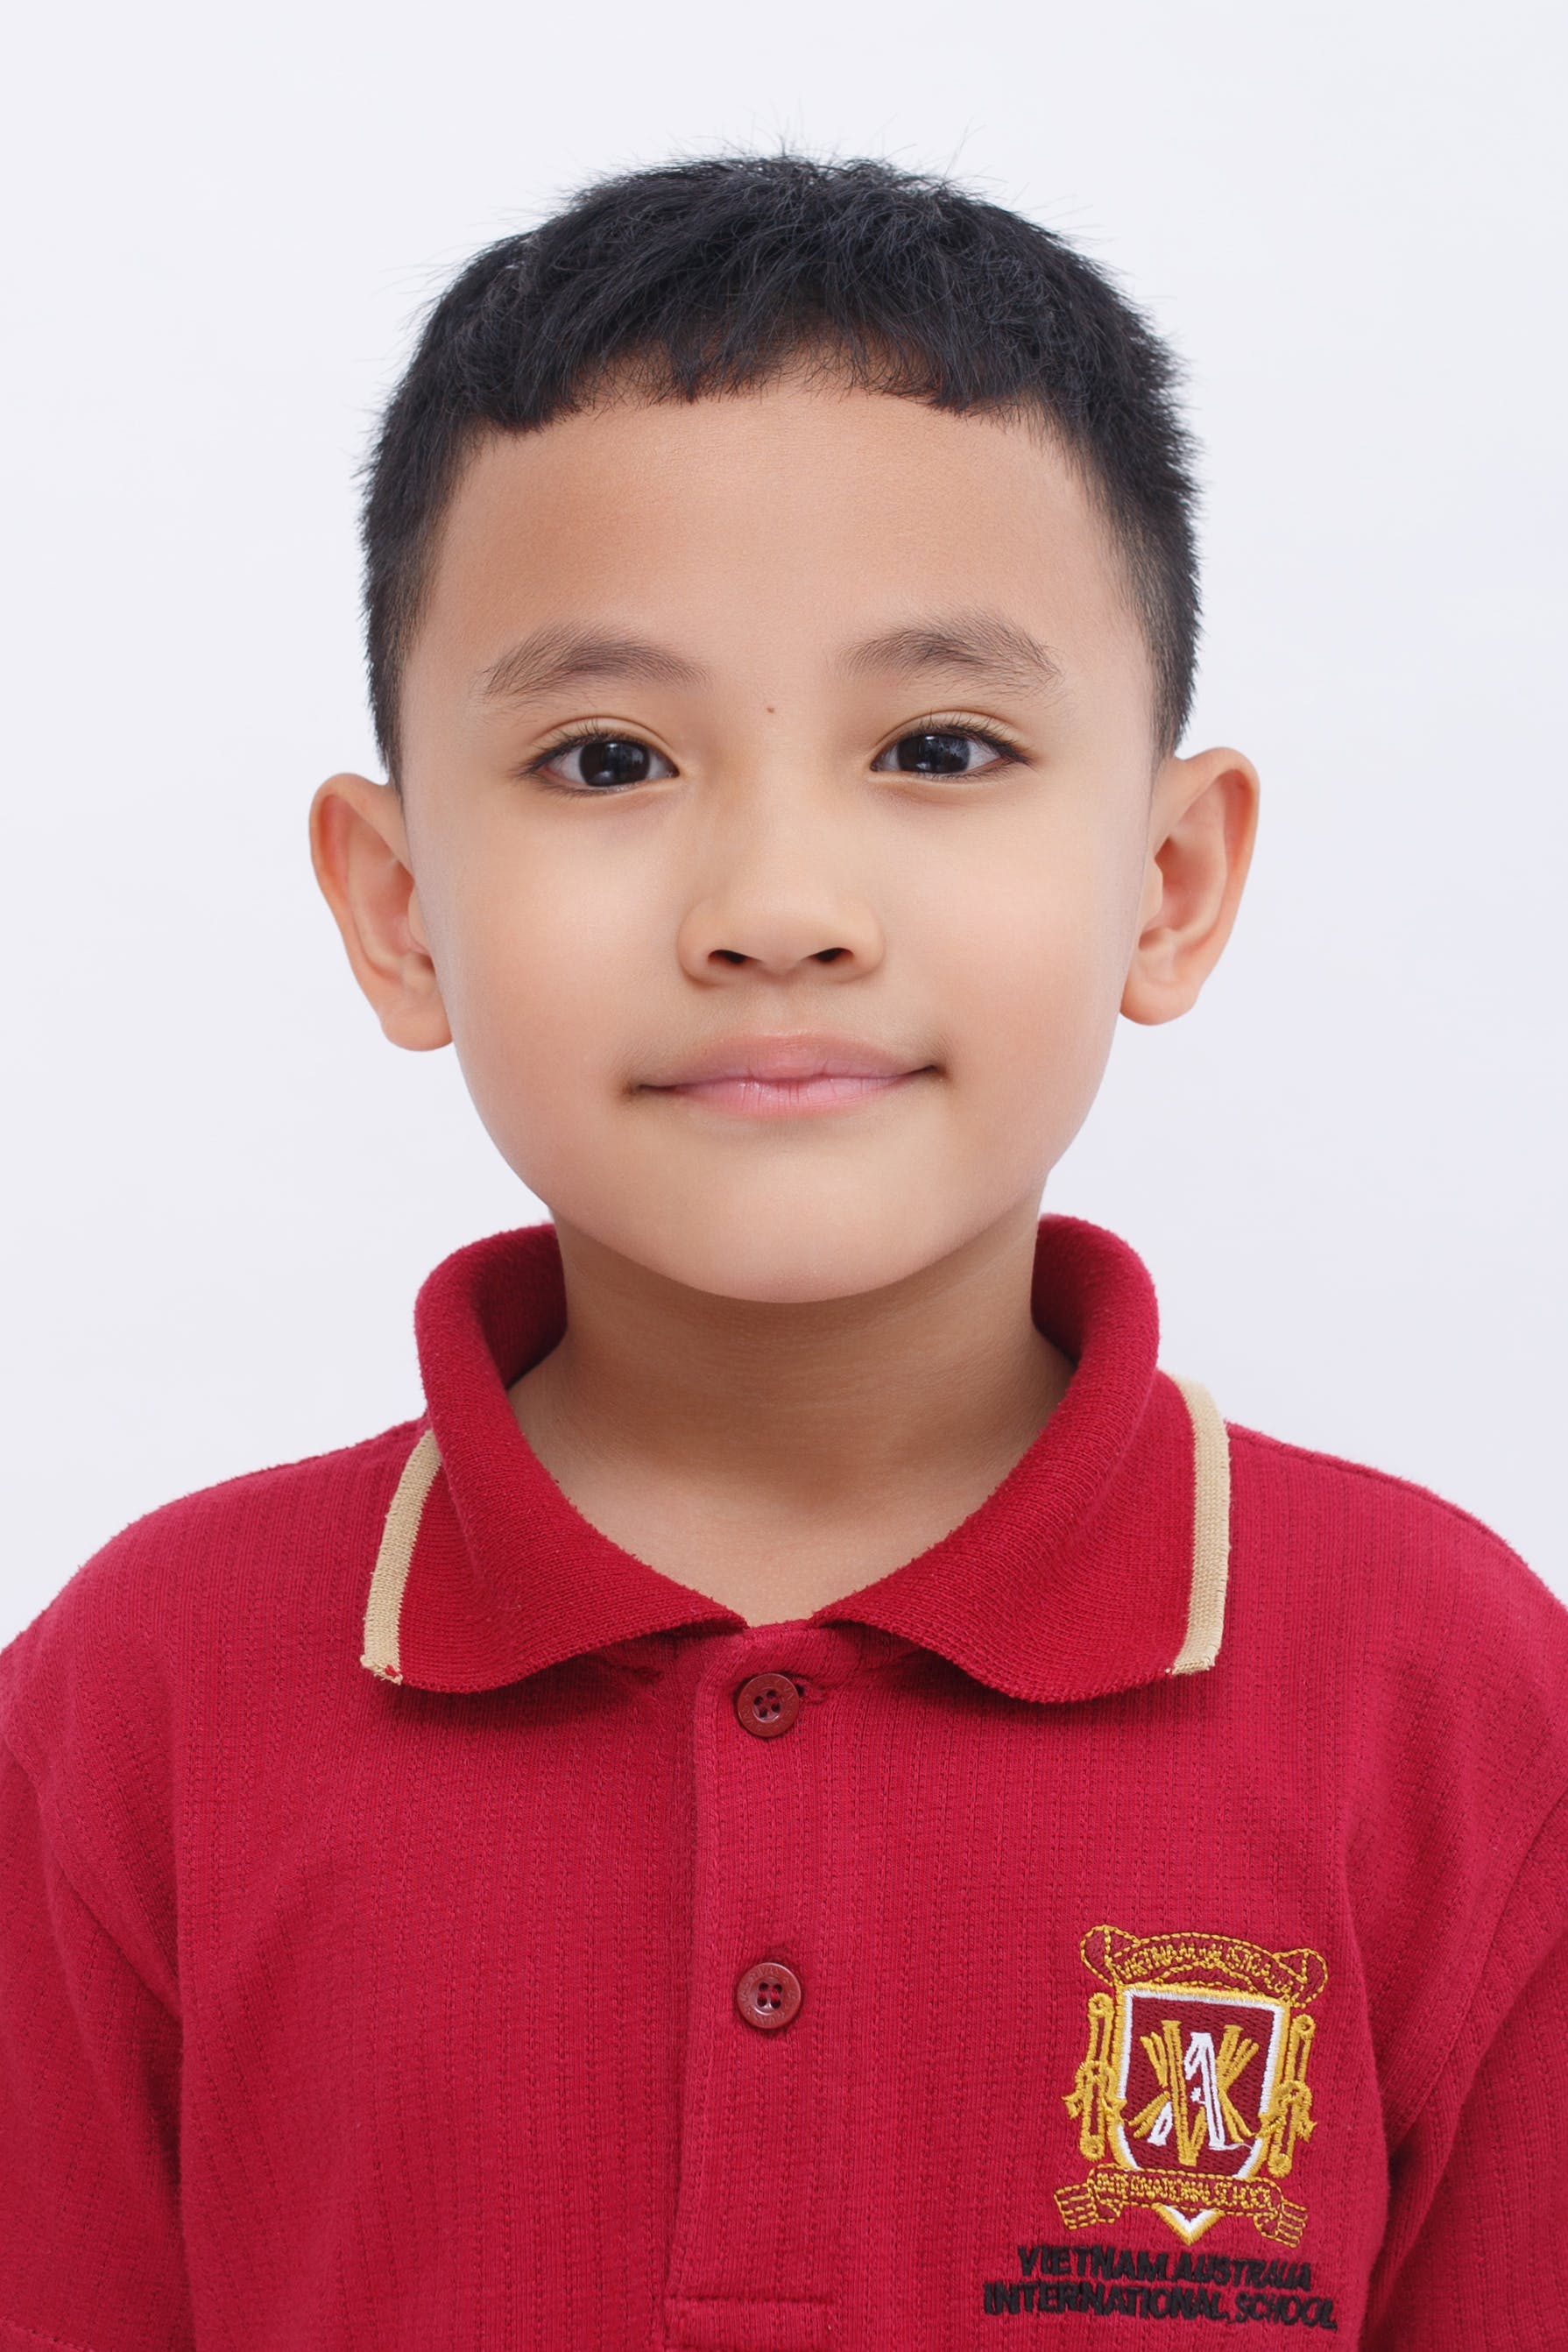 A young boy in a school Polo T-shirt | Source: Pexels